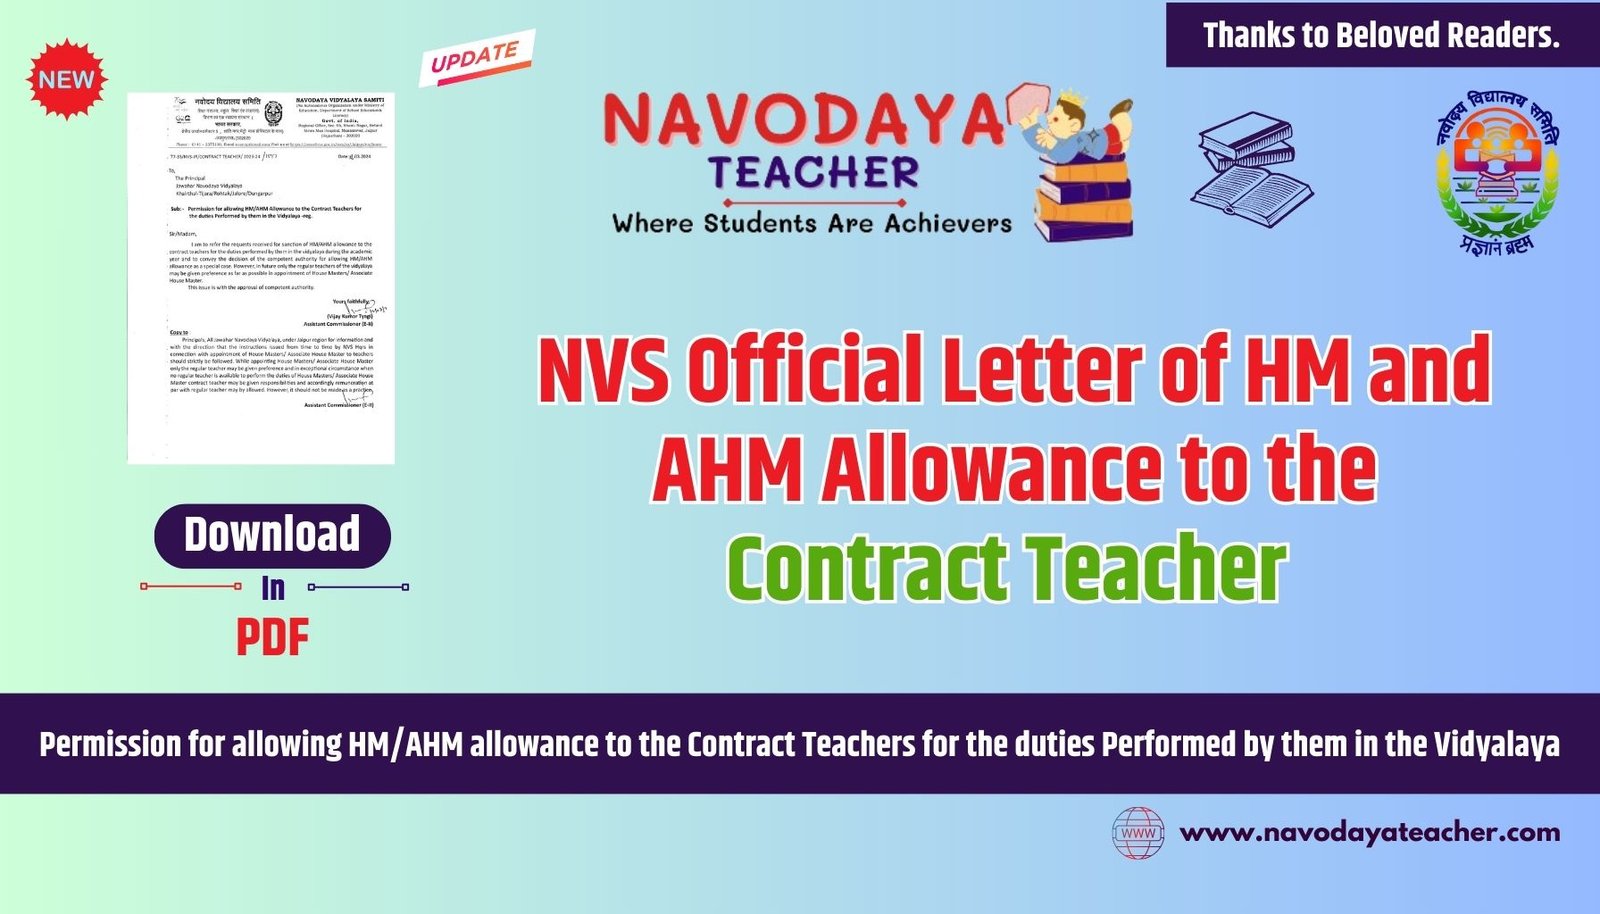 NVS Official Letter of HM and AHM Allowance to the Contract Teacher